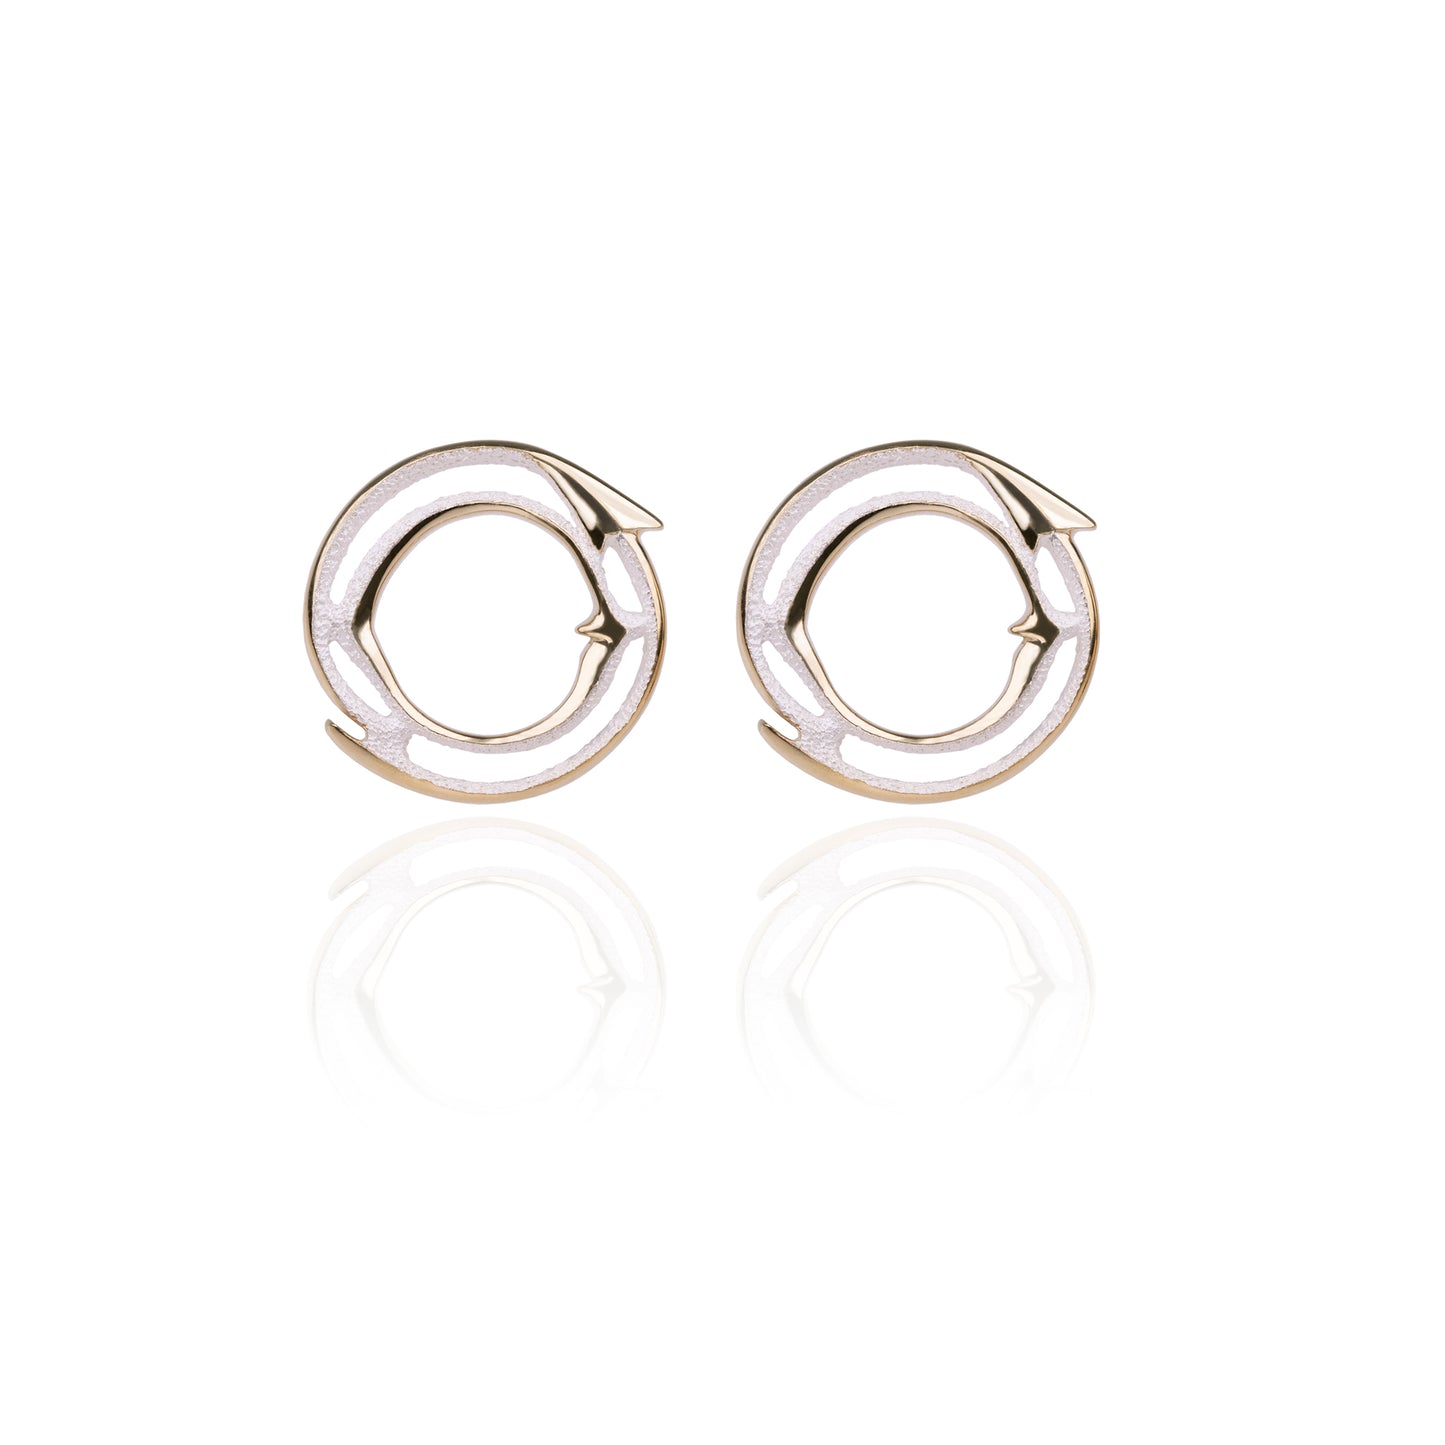 Orme-Brown Contemporary Fine Jewellery ethical Sunrise Small halo stud earrings in sustainable recycled silver with gold plating